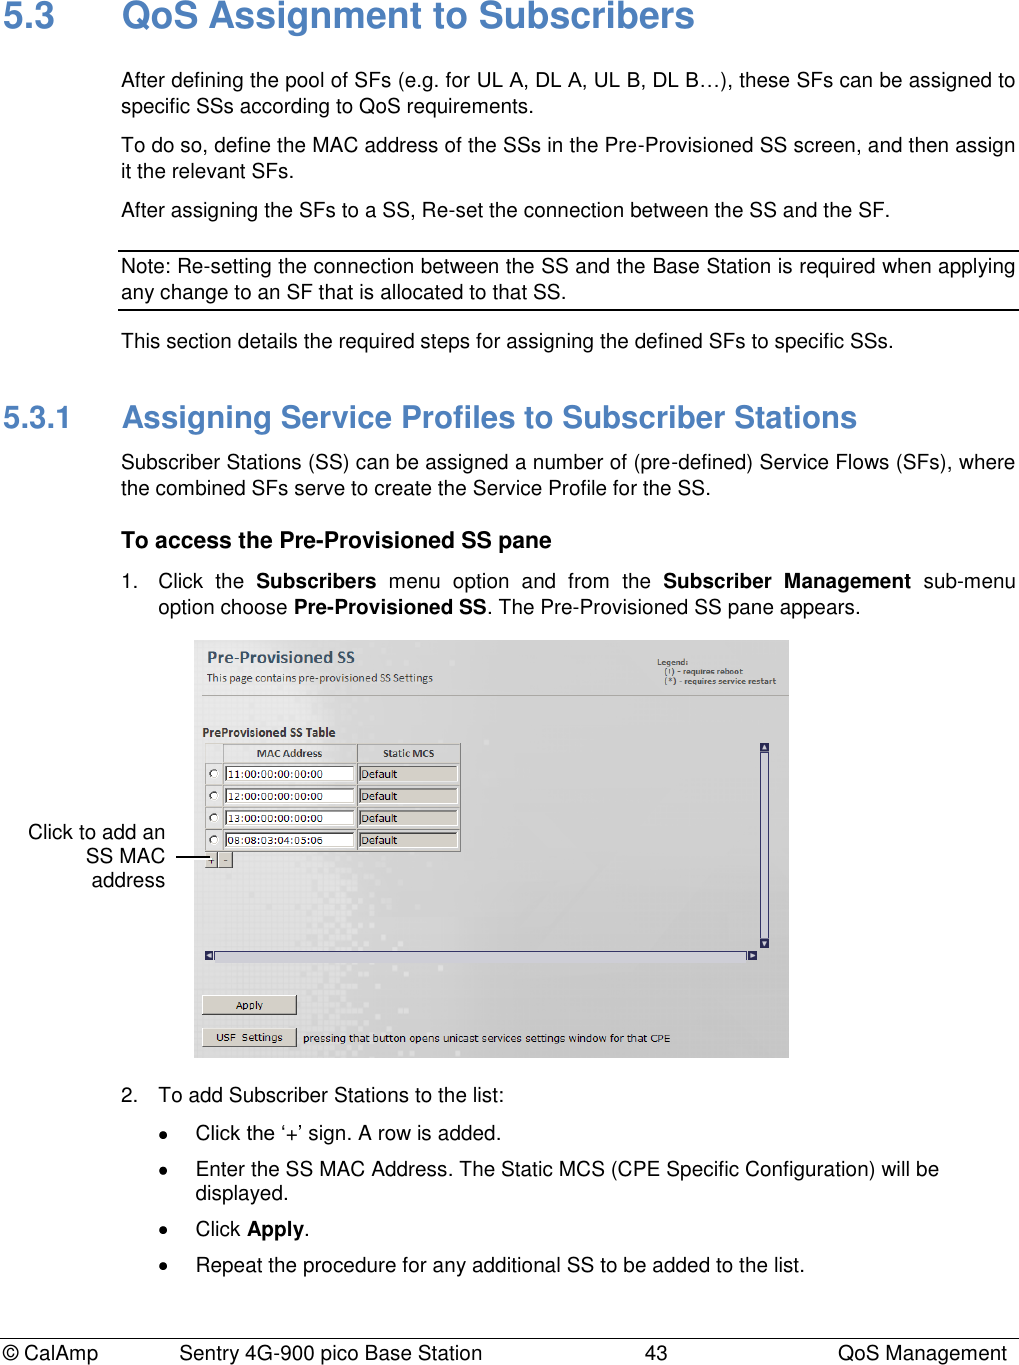 © CalAmp              Sentry 4G-900 pico Base Station                            43  QoS Management 5.3  QoS Assignment to Subscribers After defining the pool of SFs (e.g. for UL A, DL A, UL B, DL B…), these SFs can be assigned to specific SSs according to QoS requirements. To do so, define the MAC address of the SSs in the Pre-Provisioned SS screen, and then assign it the relevant SFs. After assigning the SFs to a SS, Re-set the connection between the SS and the SF. Note: Re-setting the connection between the SS and the Base Station is required when applying any change to an SF that is allocated to that SS. This section details the required steps for assigning the defined SFs to specific SSs. 5.3.1  Assigning Service Profiles to Subscriber Stations Subscriber Stations (SS) can be assigned a number of (pre-defined) Service Flows (SFs), where the combined SFs serve to create the Service Profile for the SS. To access the Pre-Provisioned SS pane 1.  Click  the  Subscribers  menu  option  and  from  the  Subscriber  Management  sub-menu option choose Pre-Provisioned SS. The Pre-Provisioned SS pane appears.  2.  To add Subscriber Stations to the list:   Click the „+‟ sign. A row is added.   Enter the SS MAC Address. The Static MCS (CPE Specific Configuration) will be displayed.   Click Apply.   Repeat the procedure for any additional SS to be added to the list.  Click to add an SS MAC address 